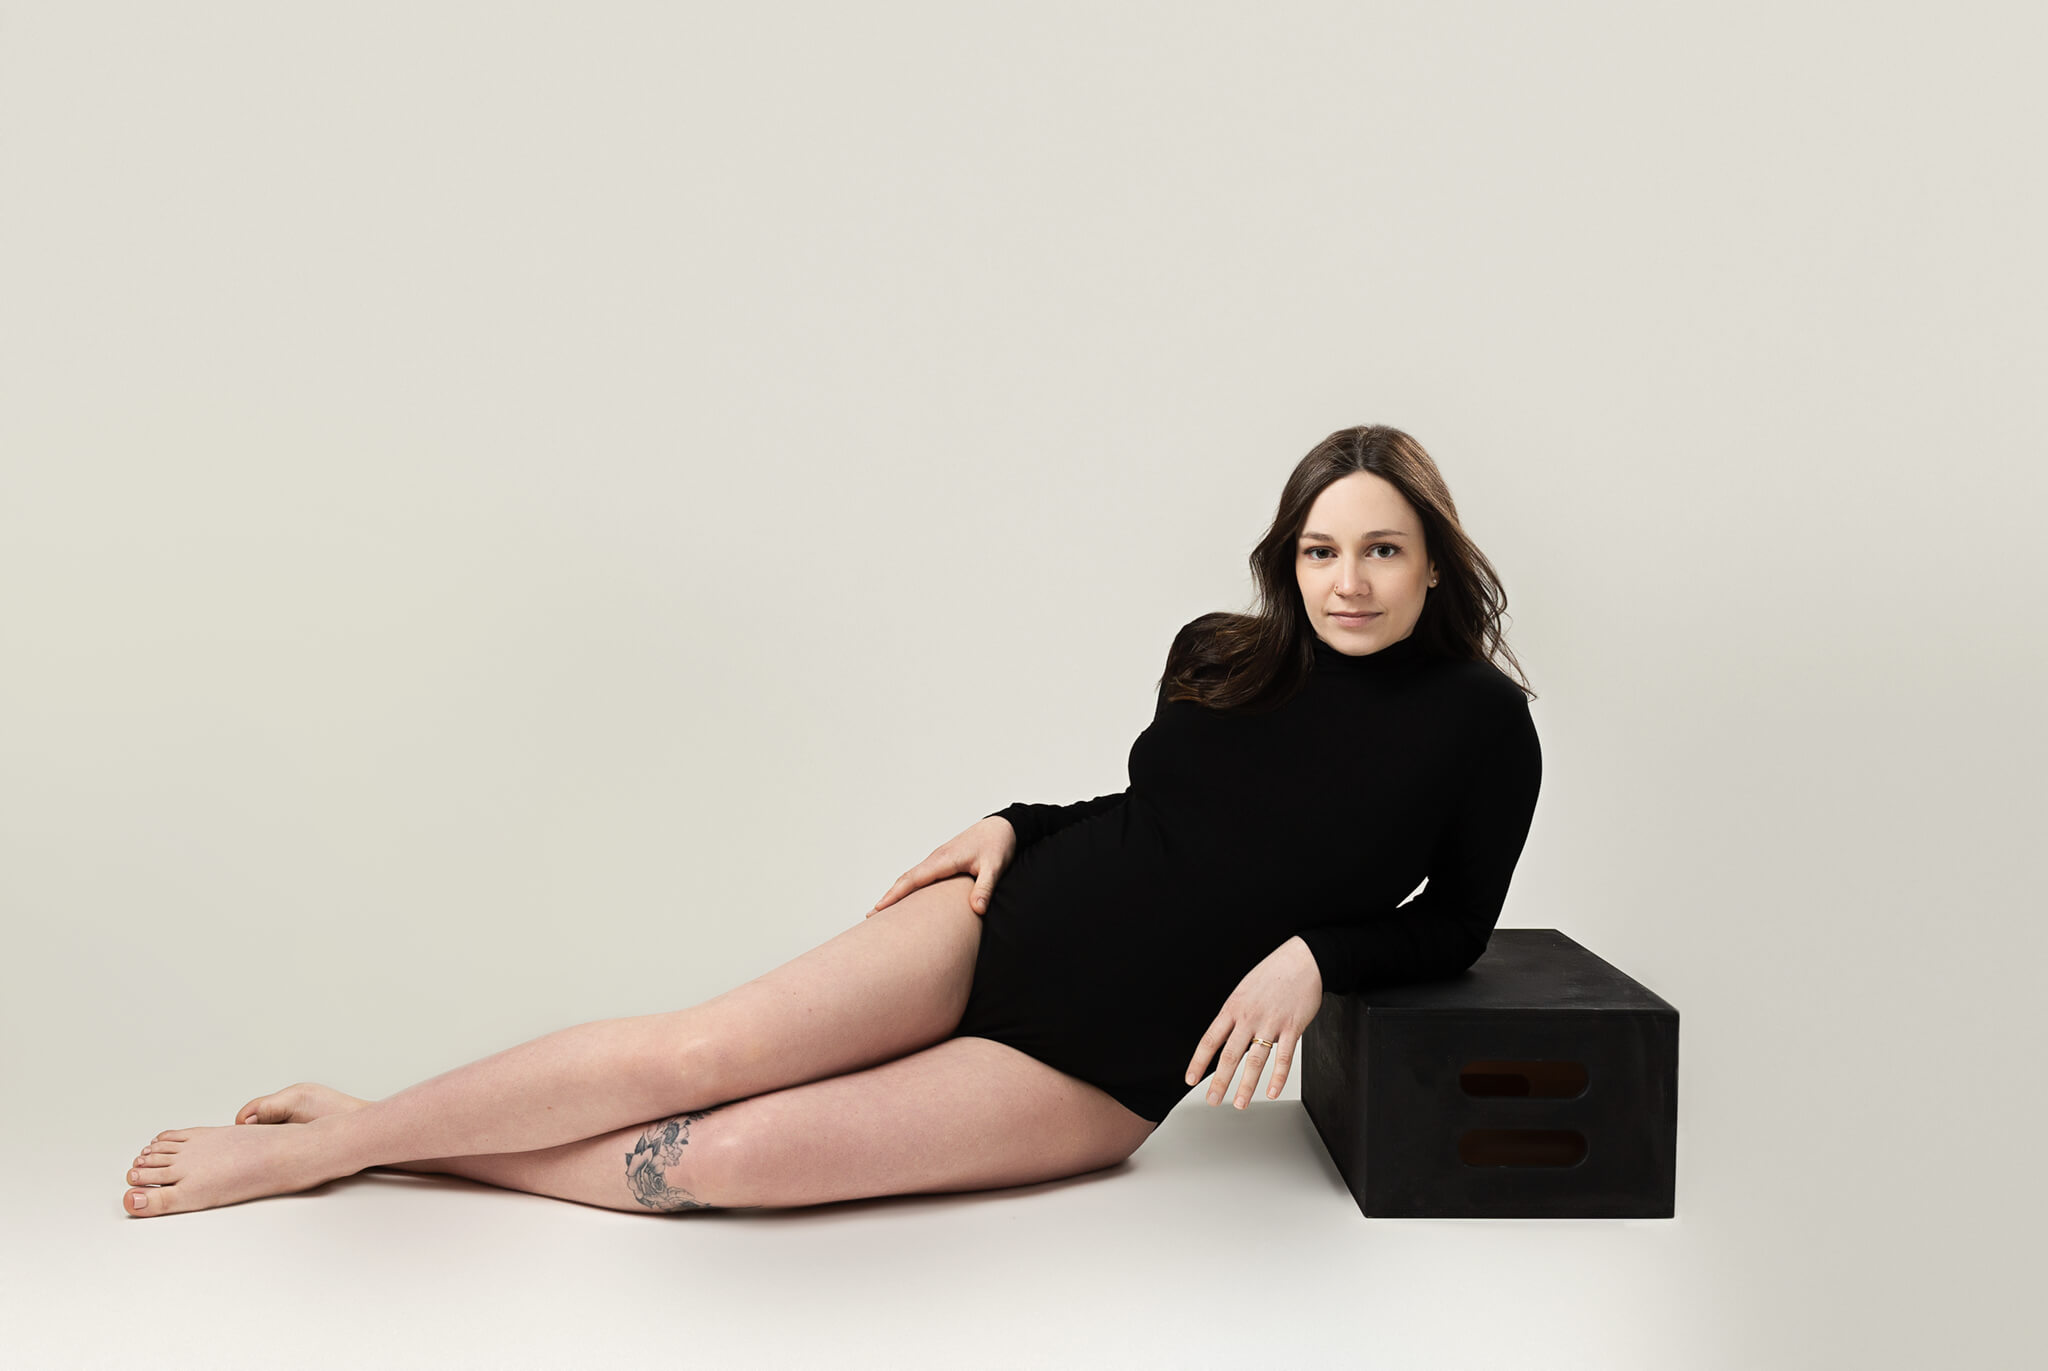 A pregnant woman in a black one-piece lays across a studio floor leaning on a black apple box